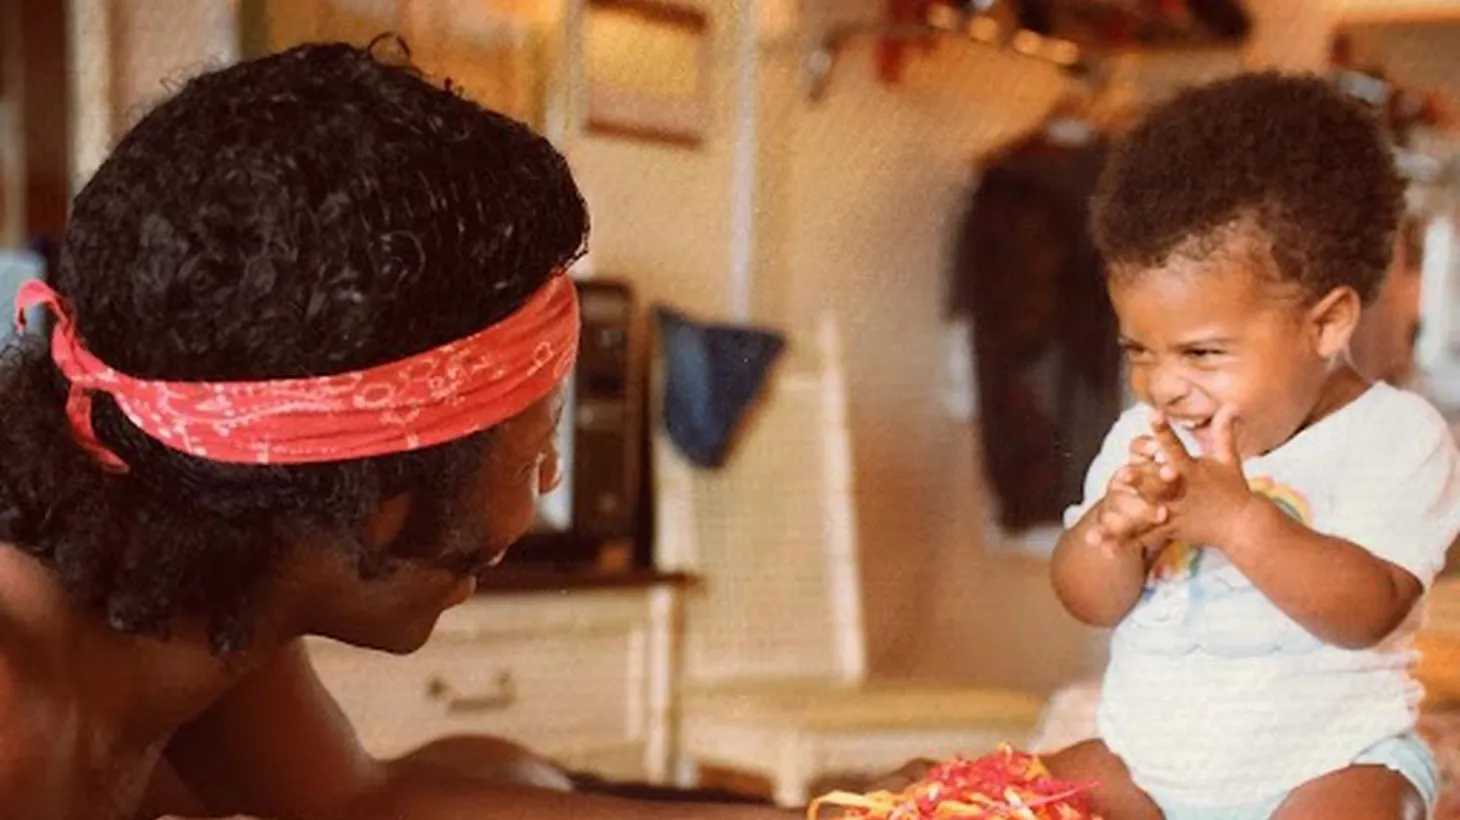 Sly Stone sharing a laugh with baby Novena.